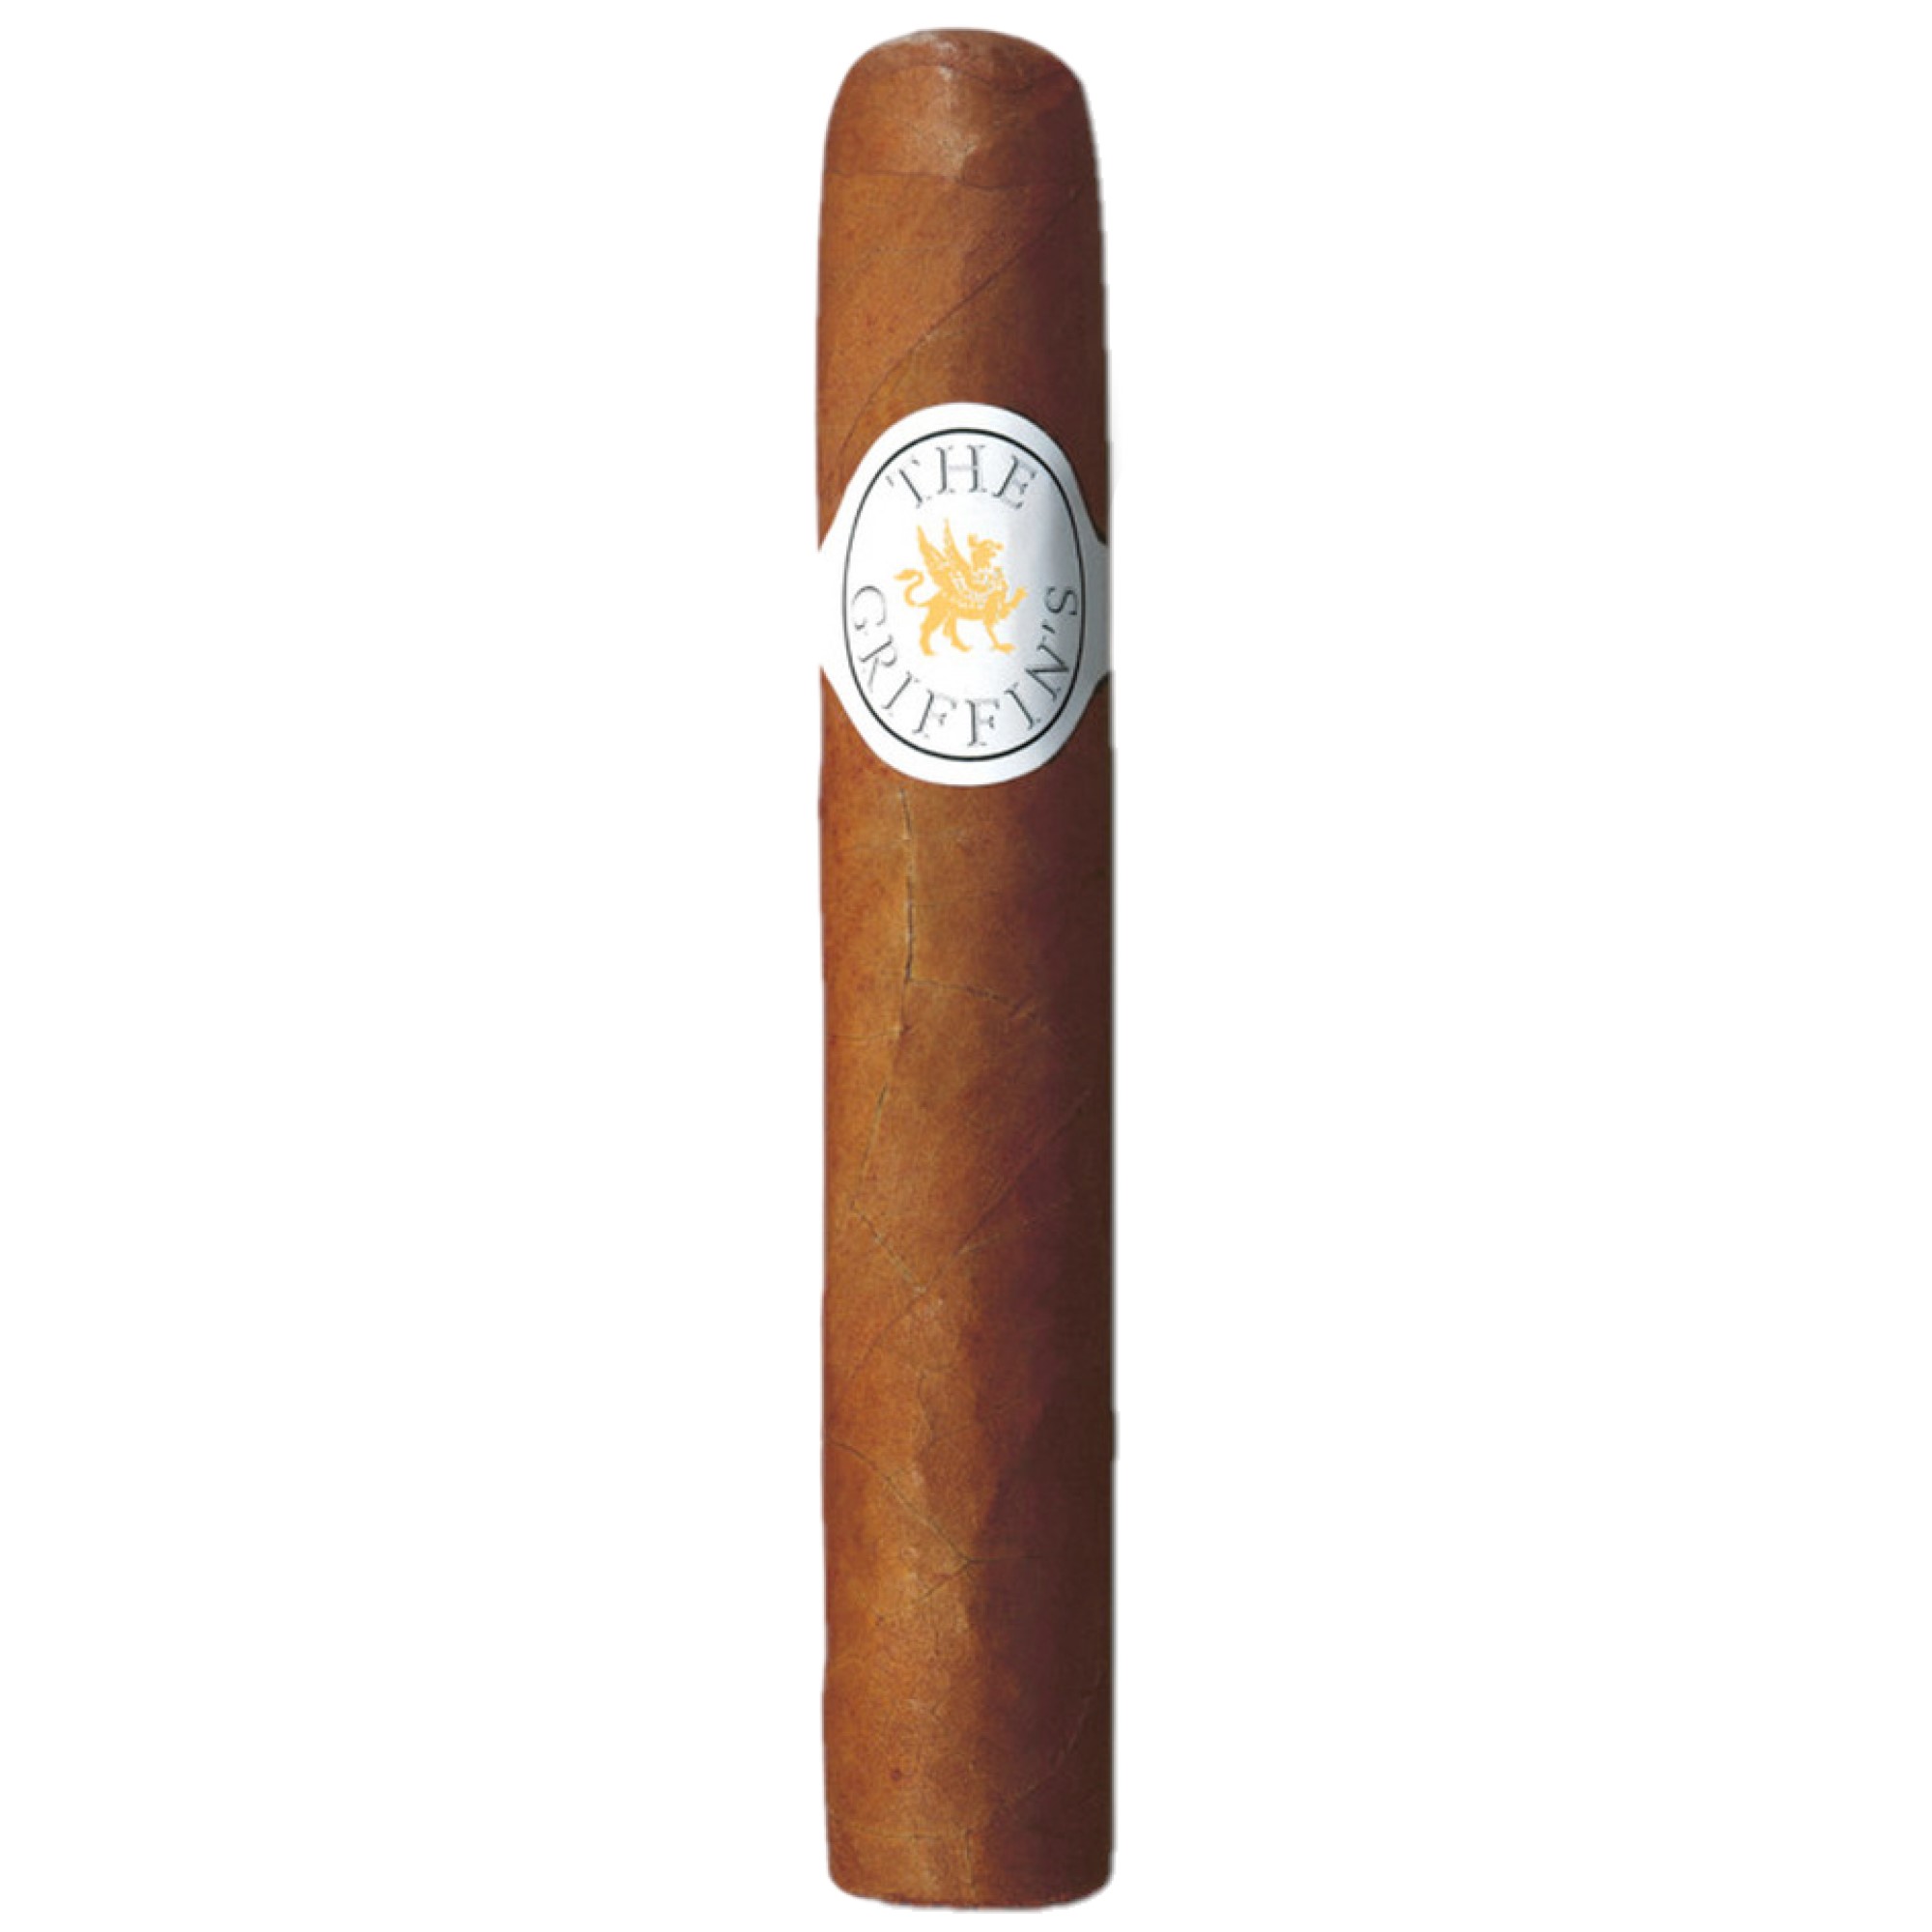 The Griffin's Classic Robusto